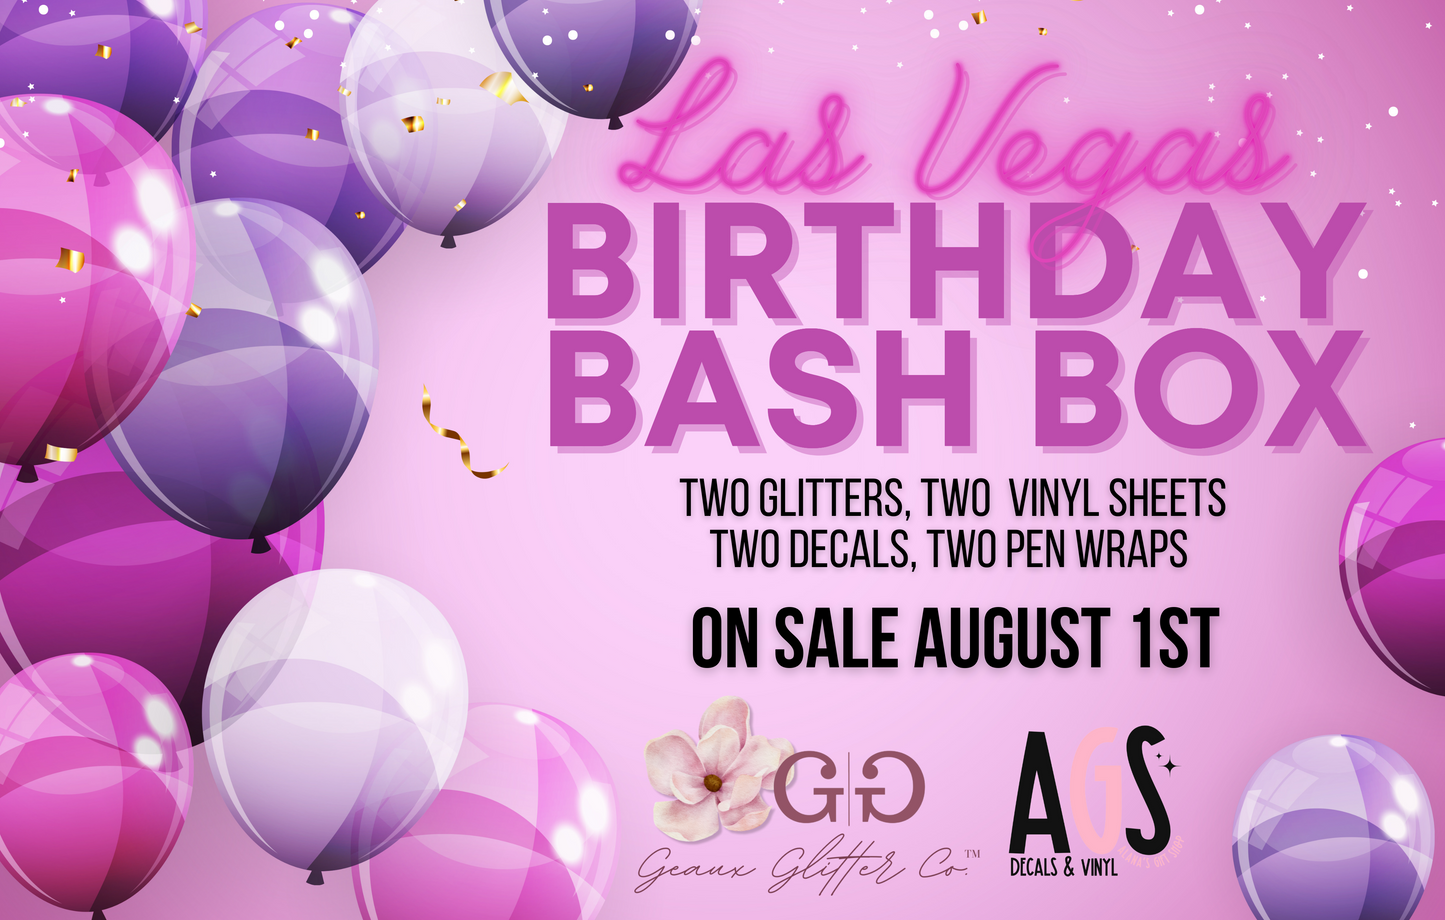 Birthday Bash Box - PRE-ORDER - PLEASE DO NOT USE DISCOUNT CODES!